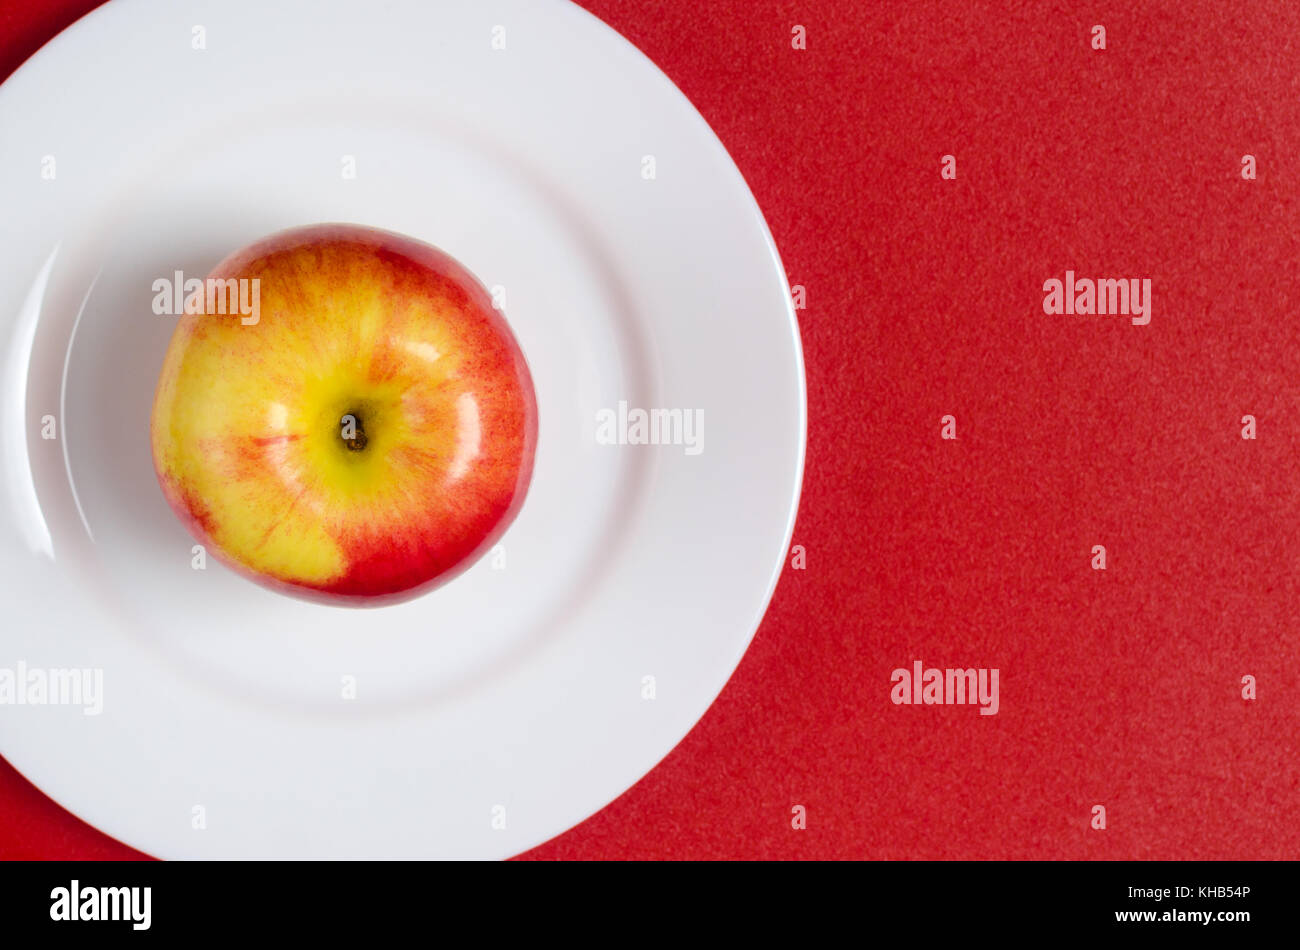 ripe red-yellow apple on a white plate against the red background Stock Photo